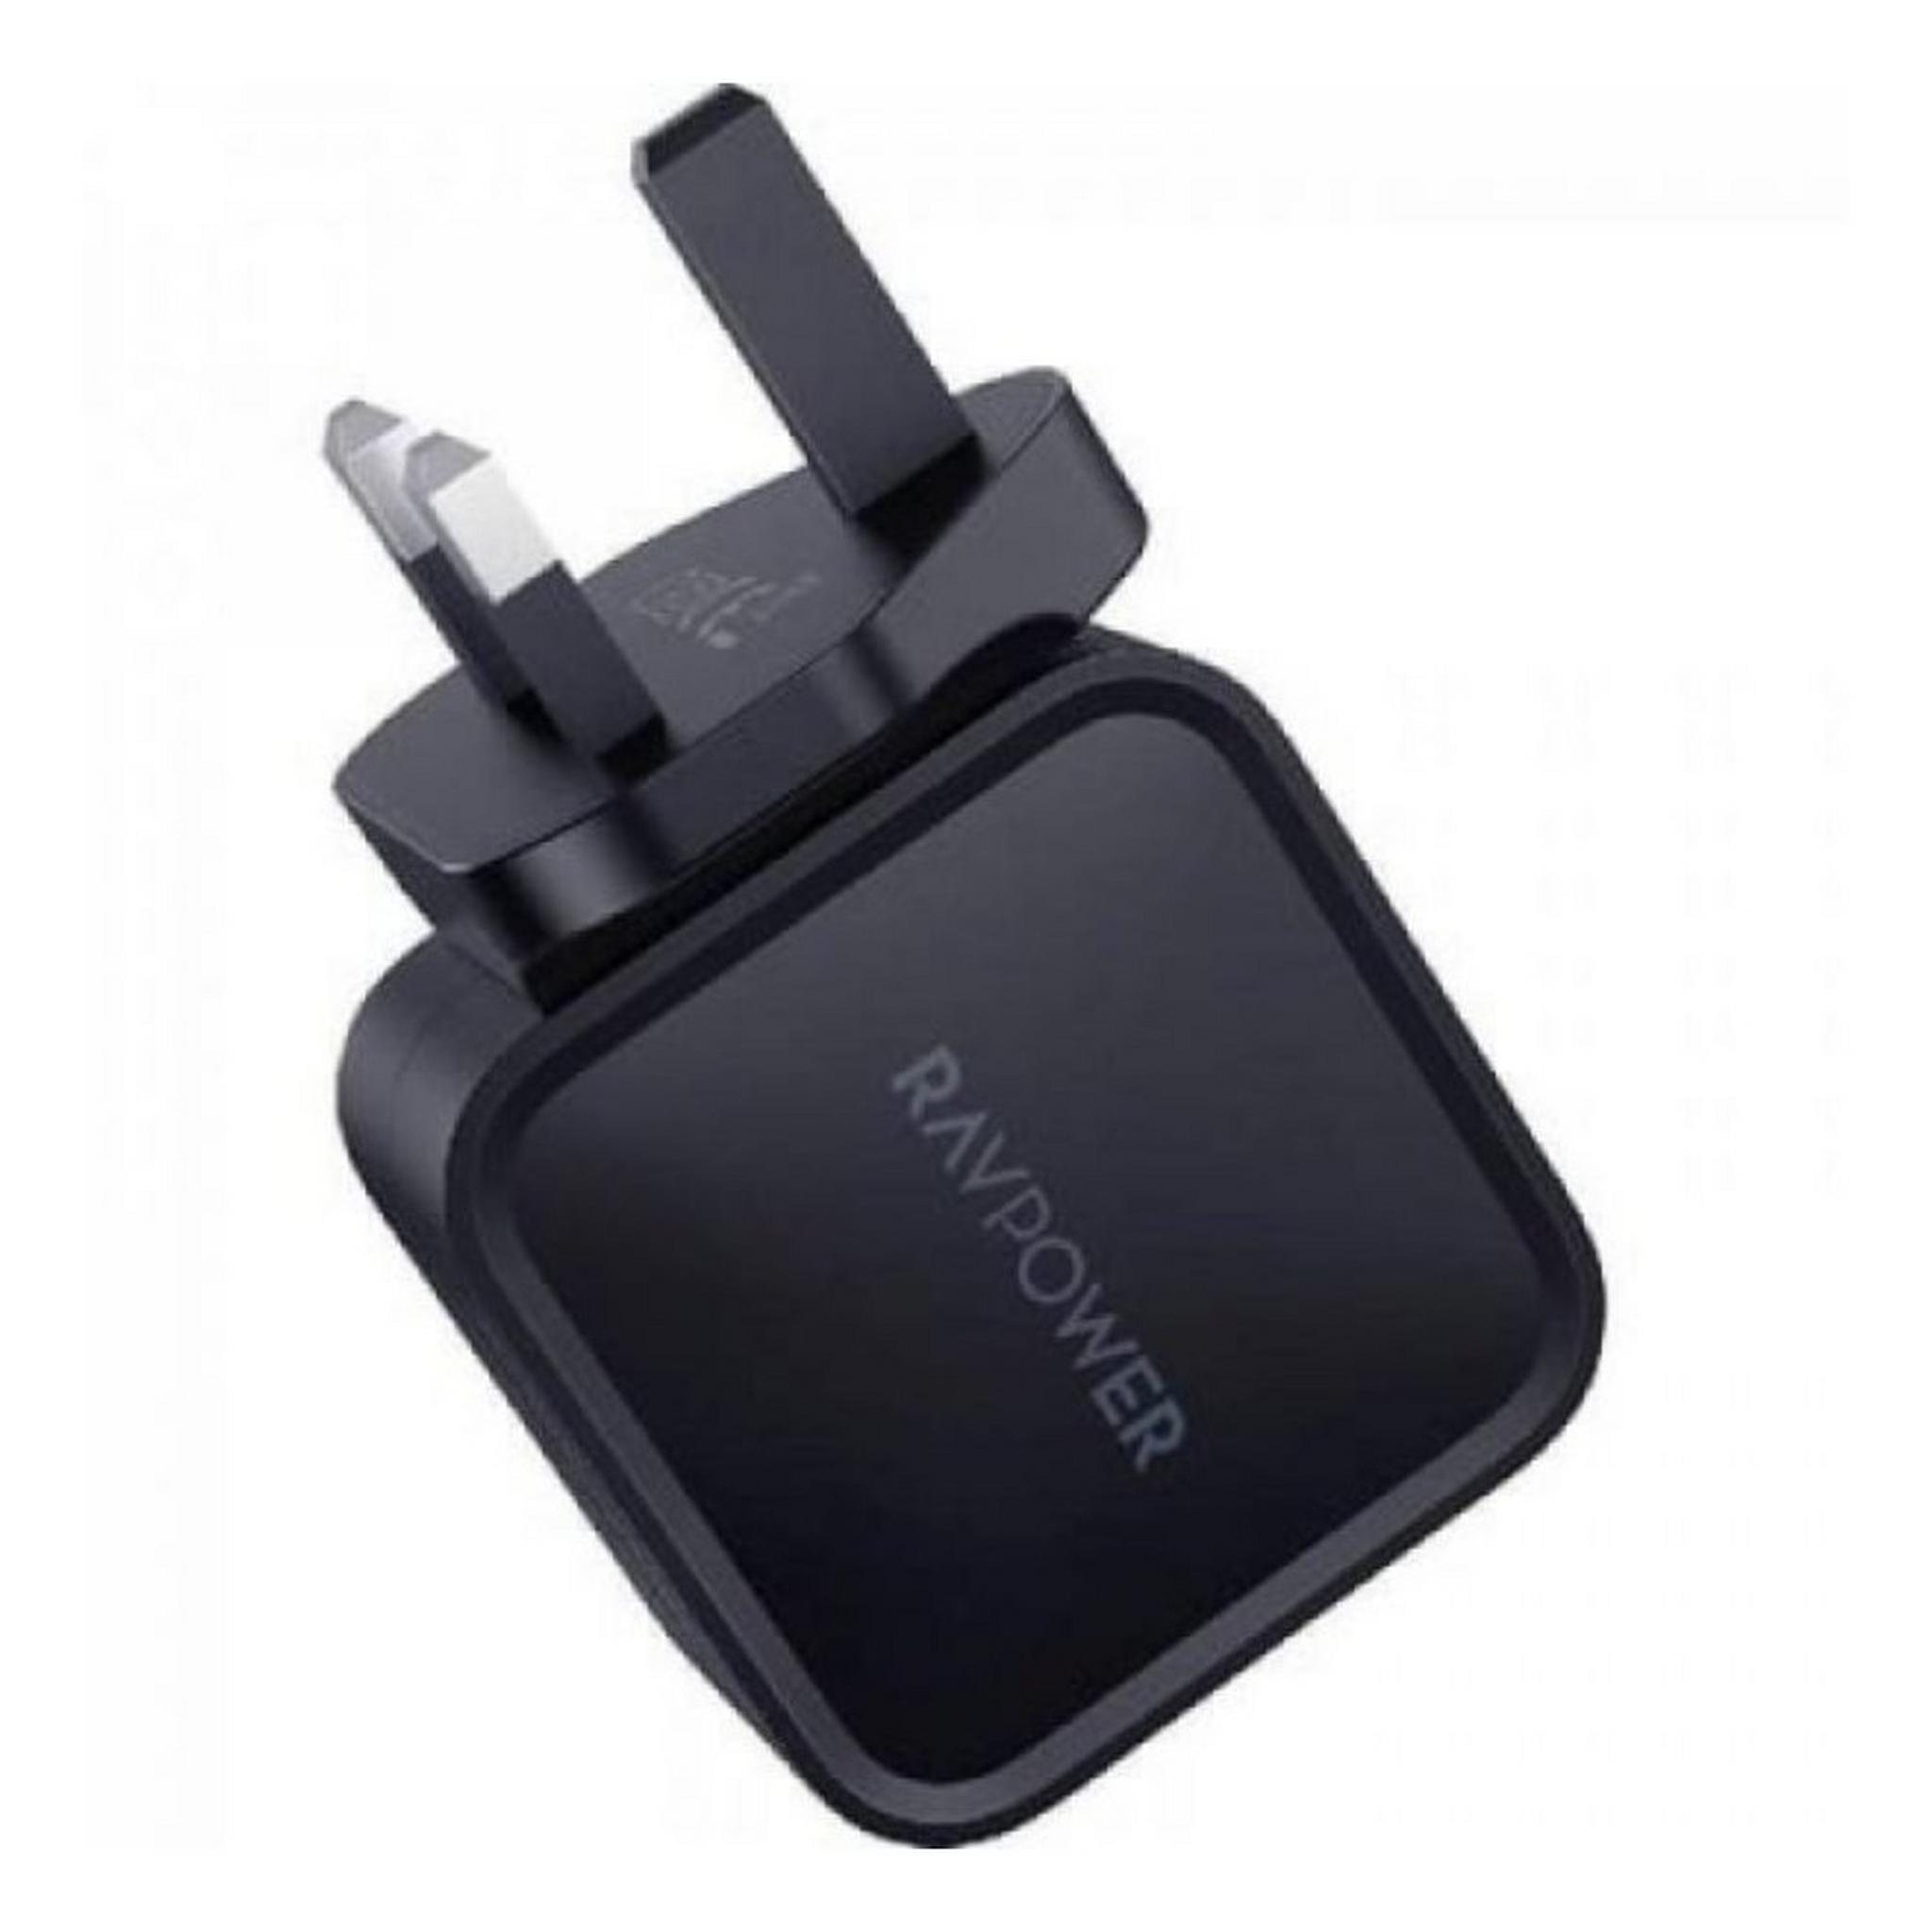 Ravpower Fast Charger USB-C Power Adapter RP-PC152 - Black